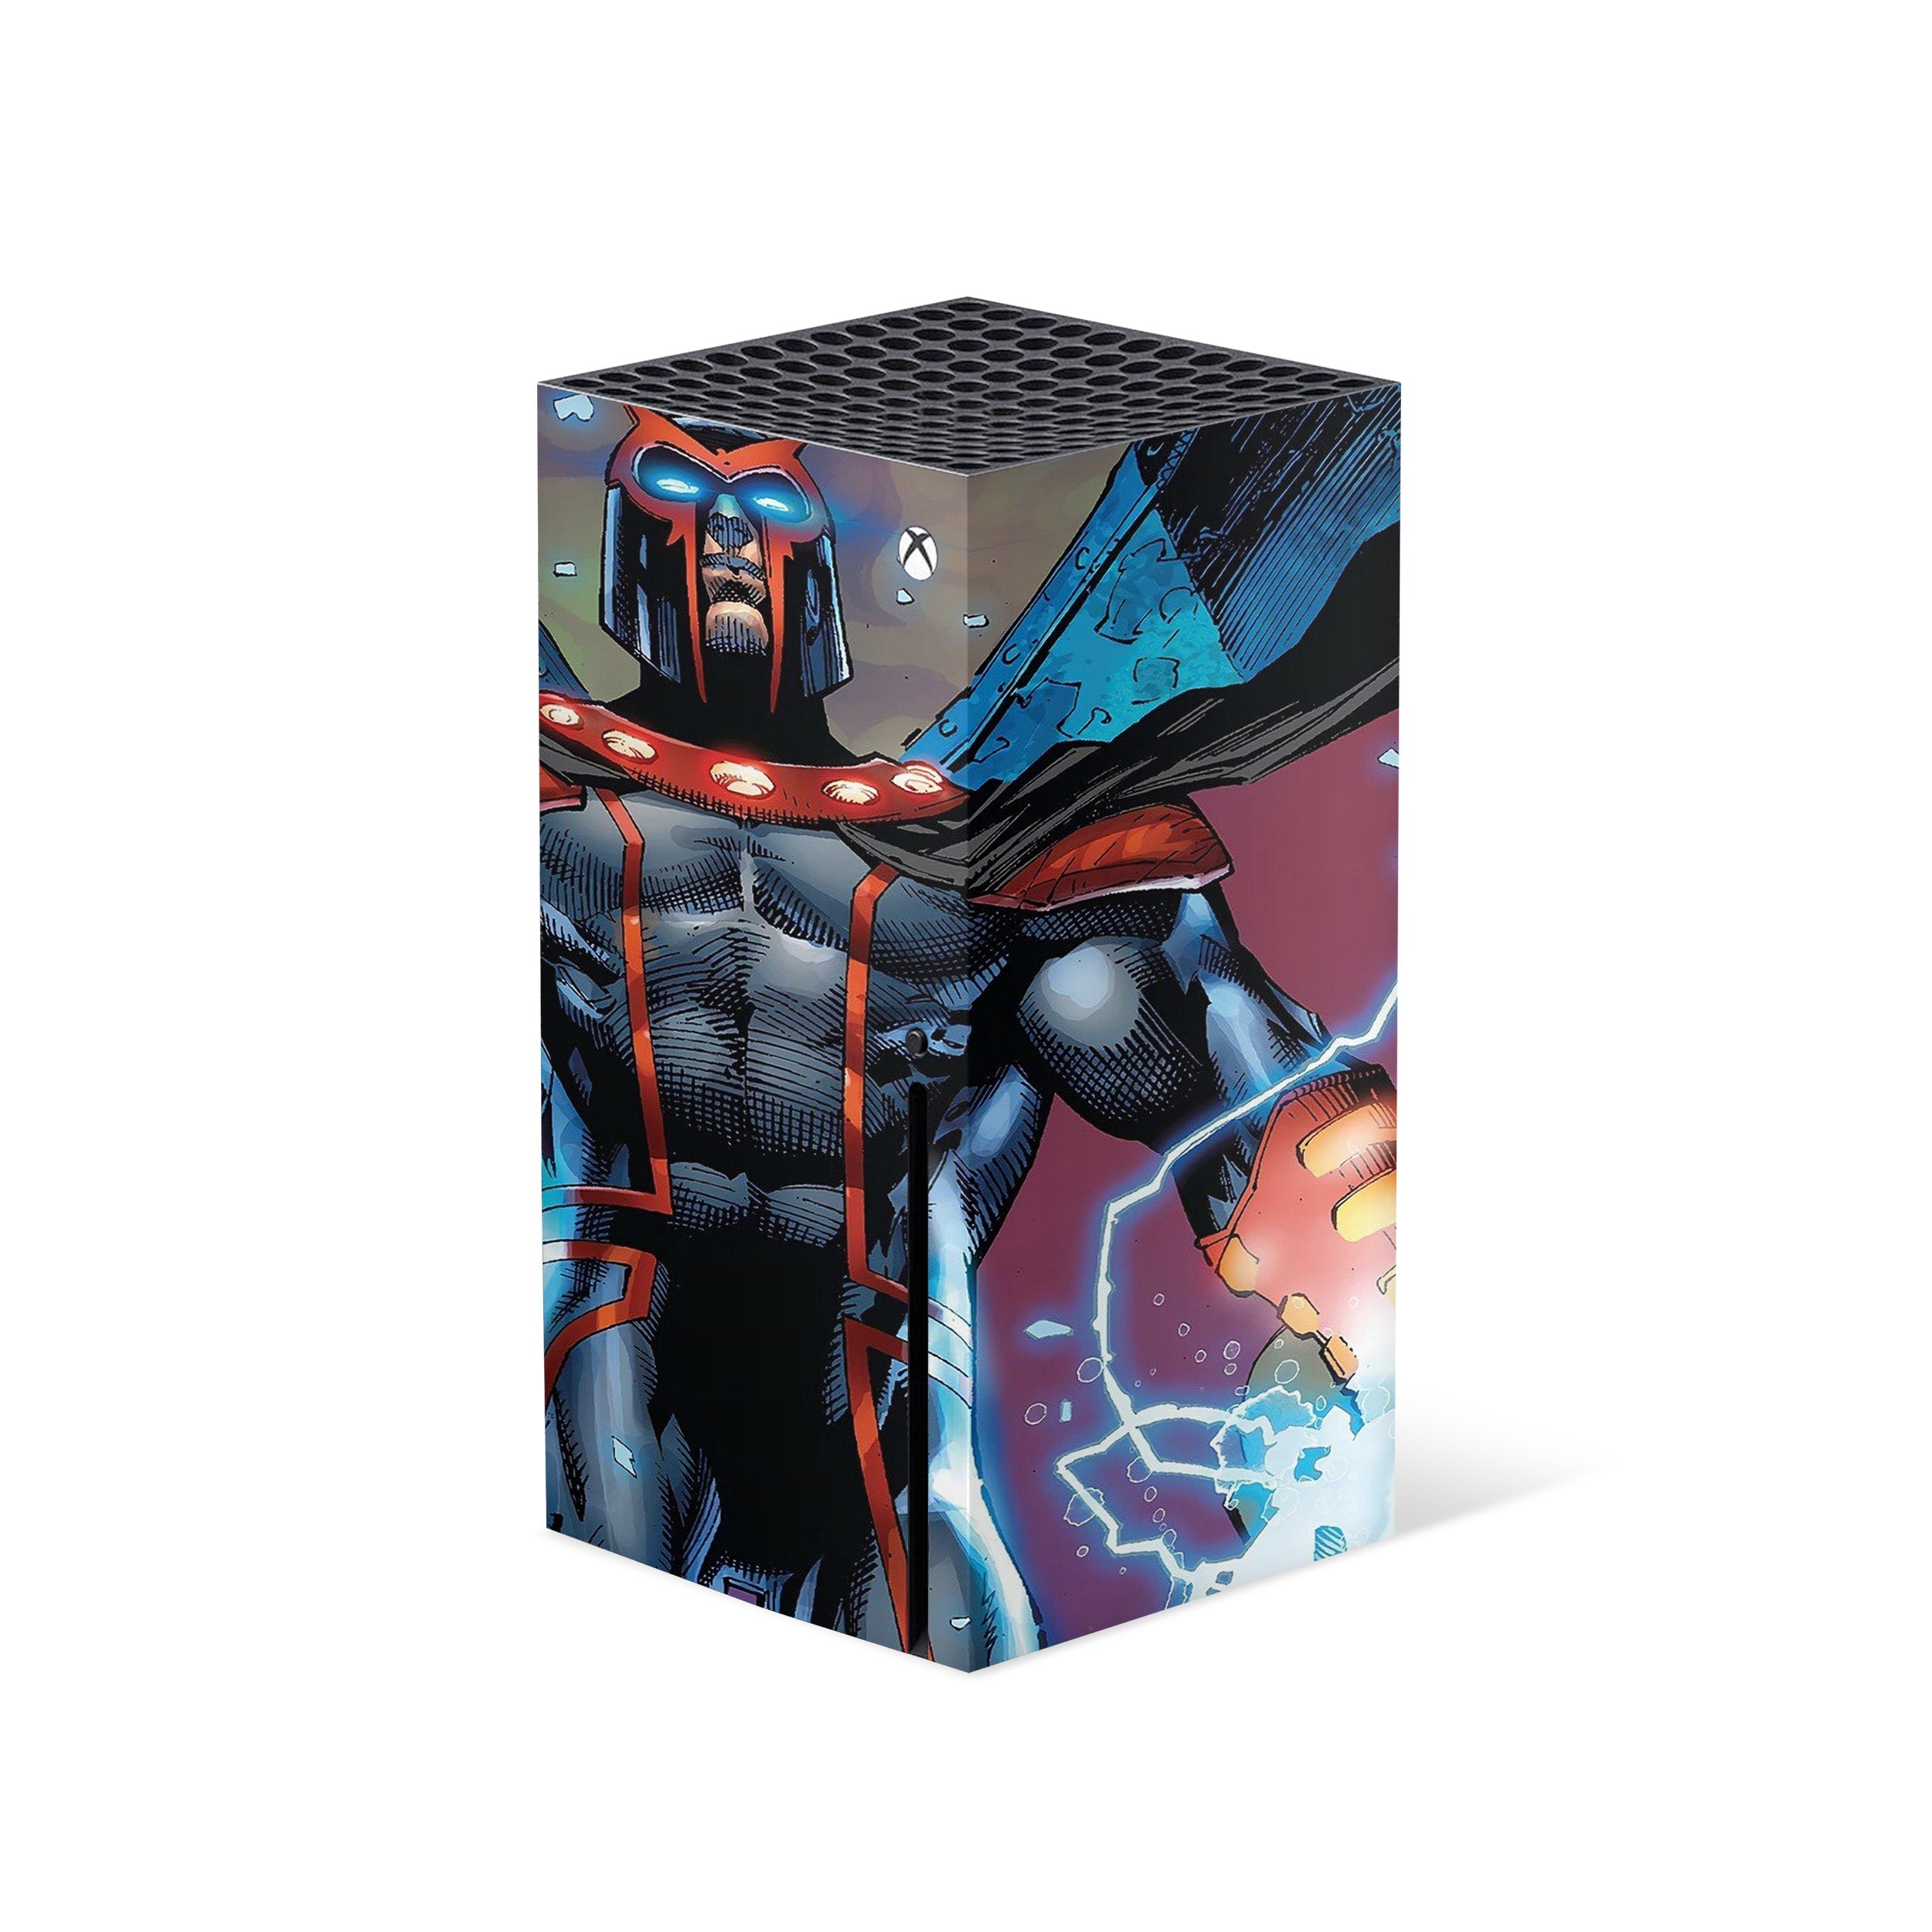 A video game skin featuring a Marvel Comics X Men Magneto design for the Xbox Series X.